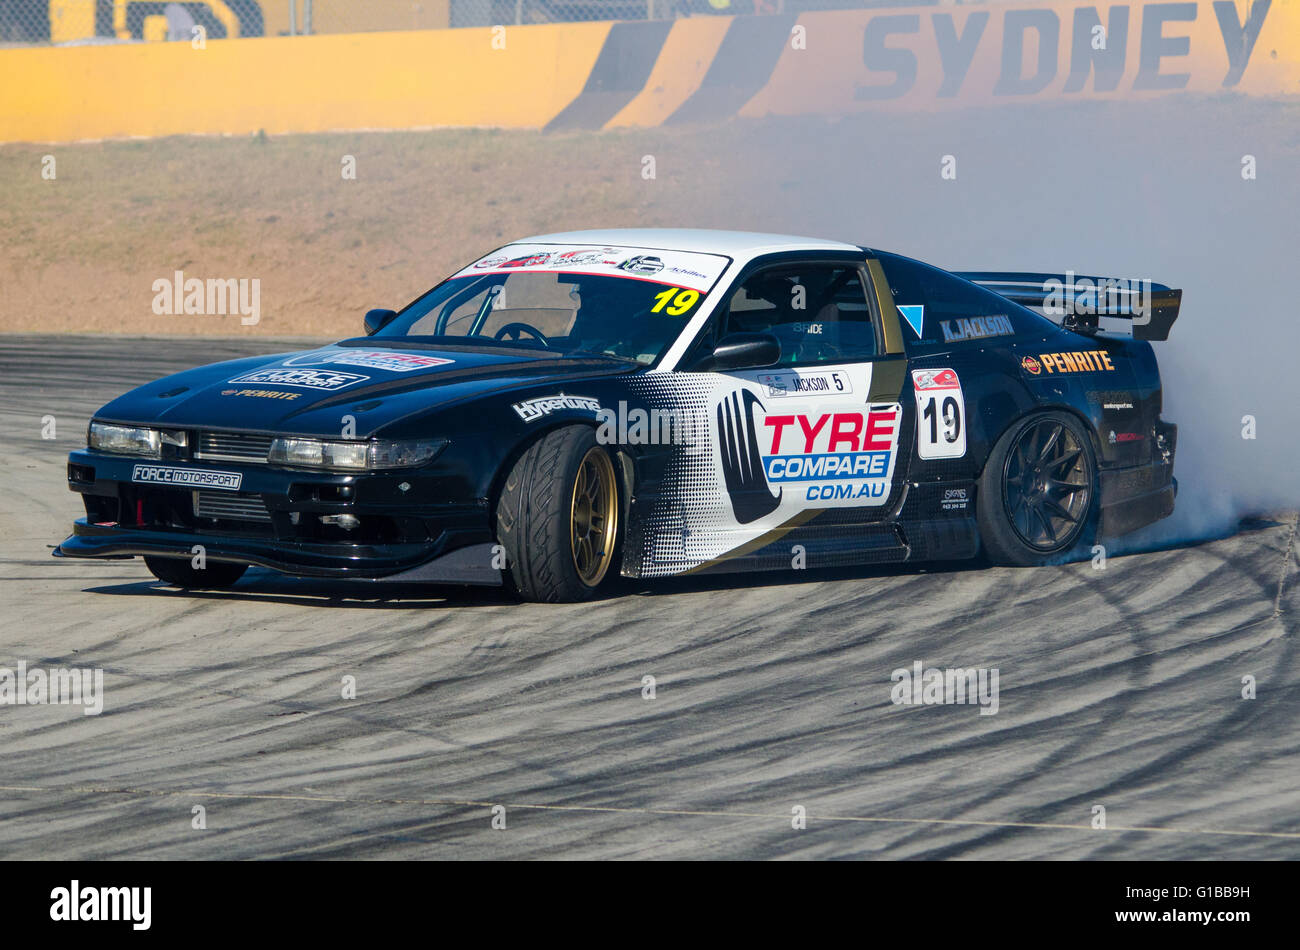 Sydney, Australia - 19th December 2015: Drift racers compete in the Hi-Tec Drift Allstars Series Championship Round which took place at Sydney Motorsport Park. Stock Photo